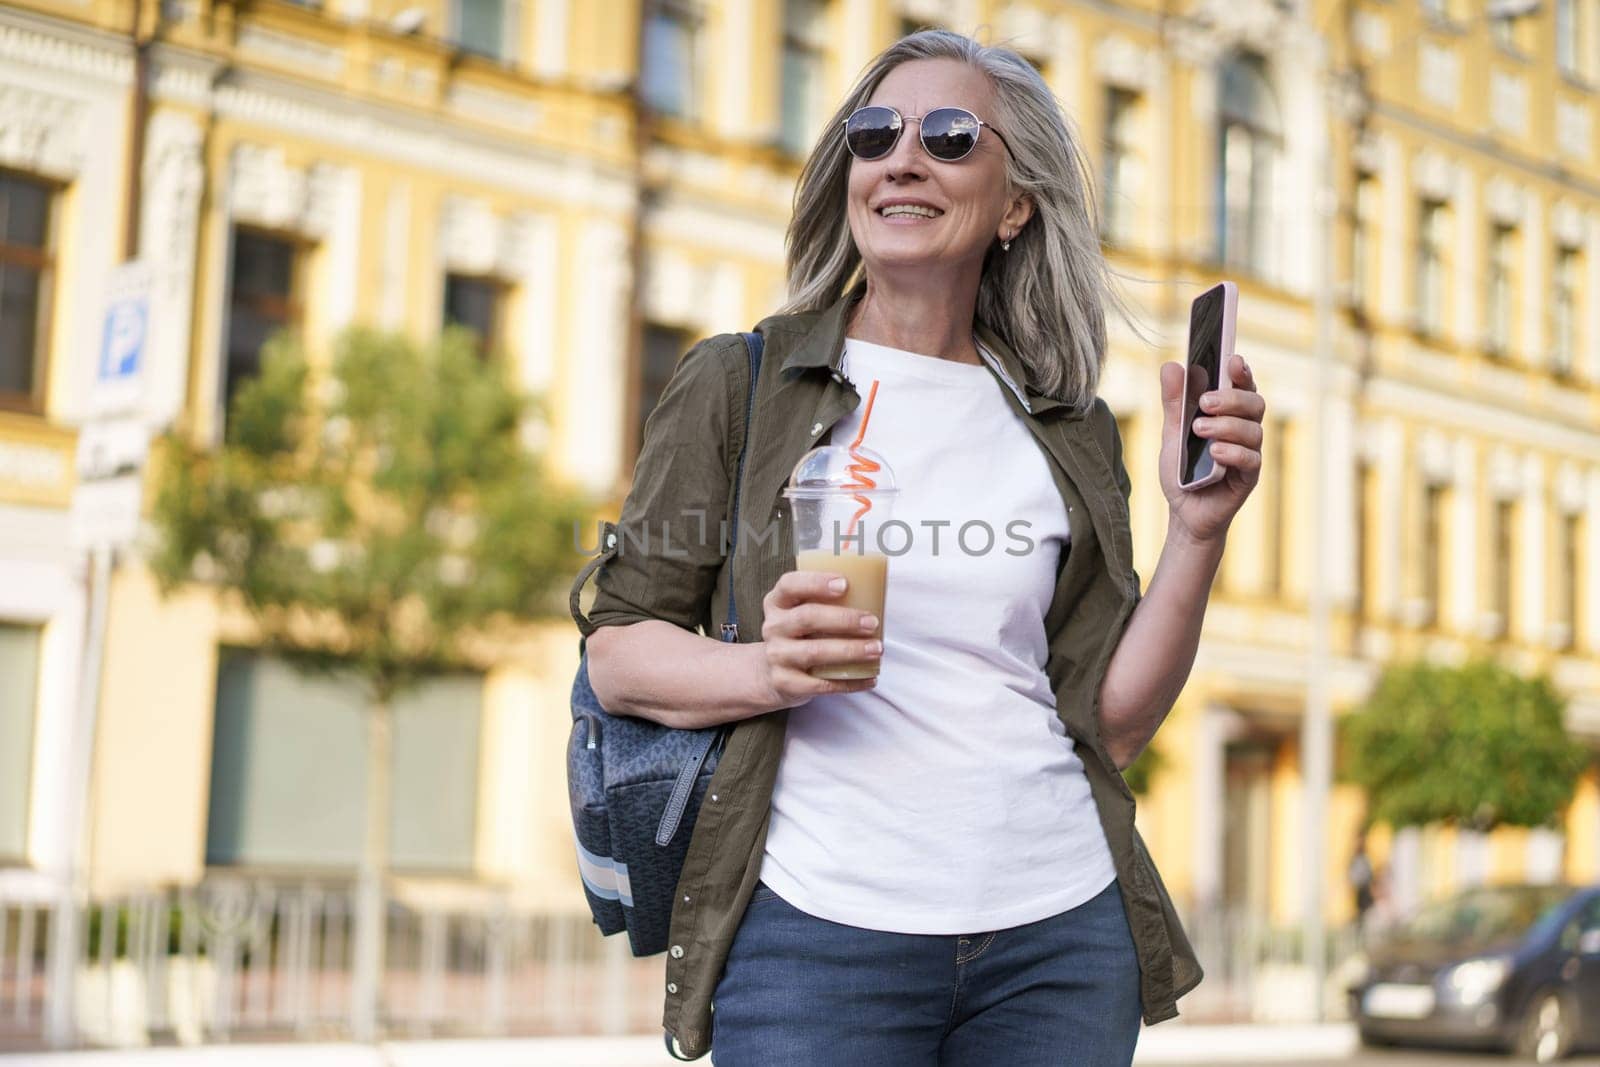 Biohacking Concept. A Mature European Woman with Gray Hair wearing Sunglasses Walks around the City with a Drink and a Smartphone. Healthy Longevity. High quality photo